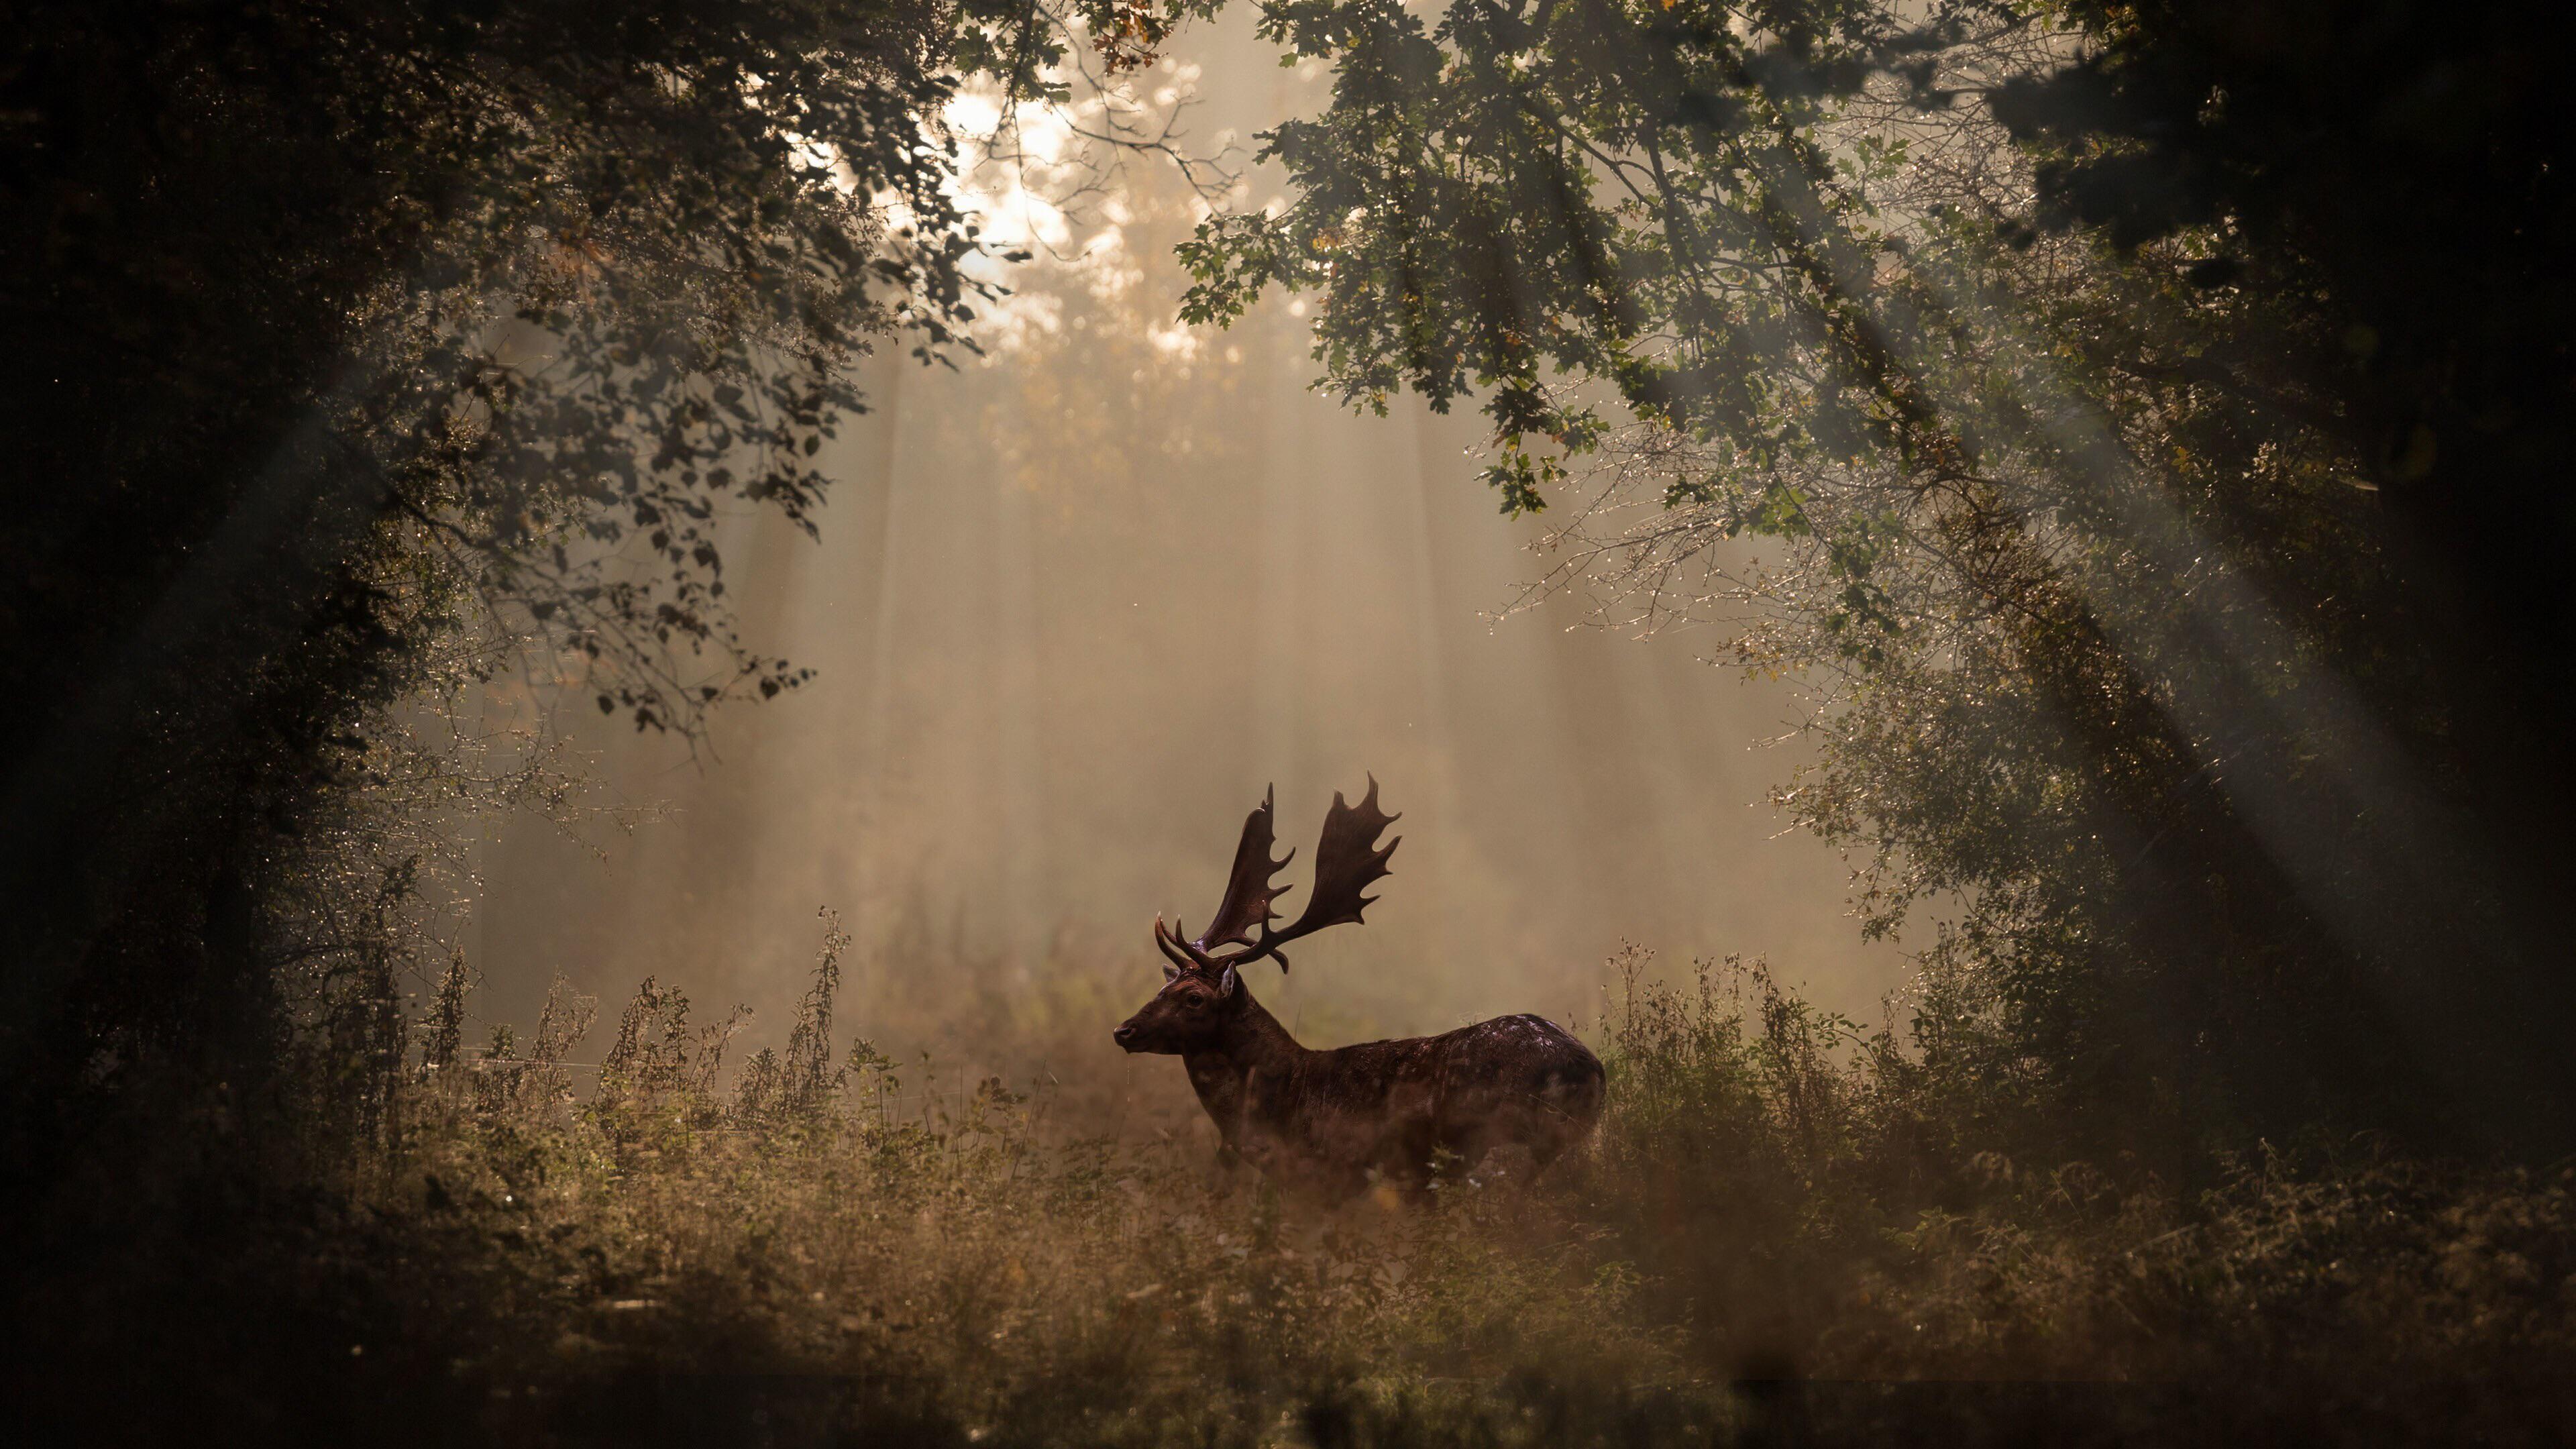 Deer 4K wallpaper for your desktop or mobile screen free and easy to download